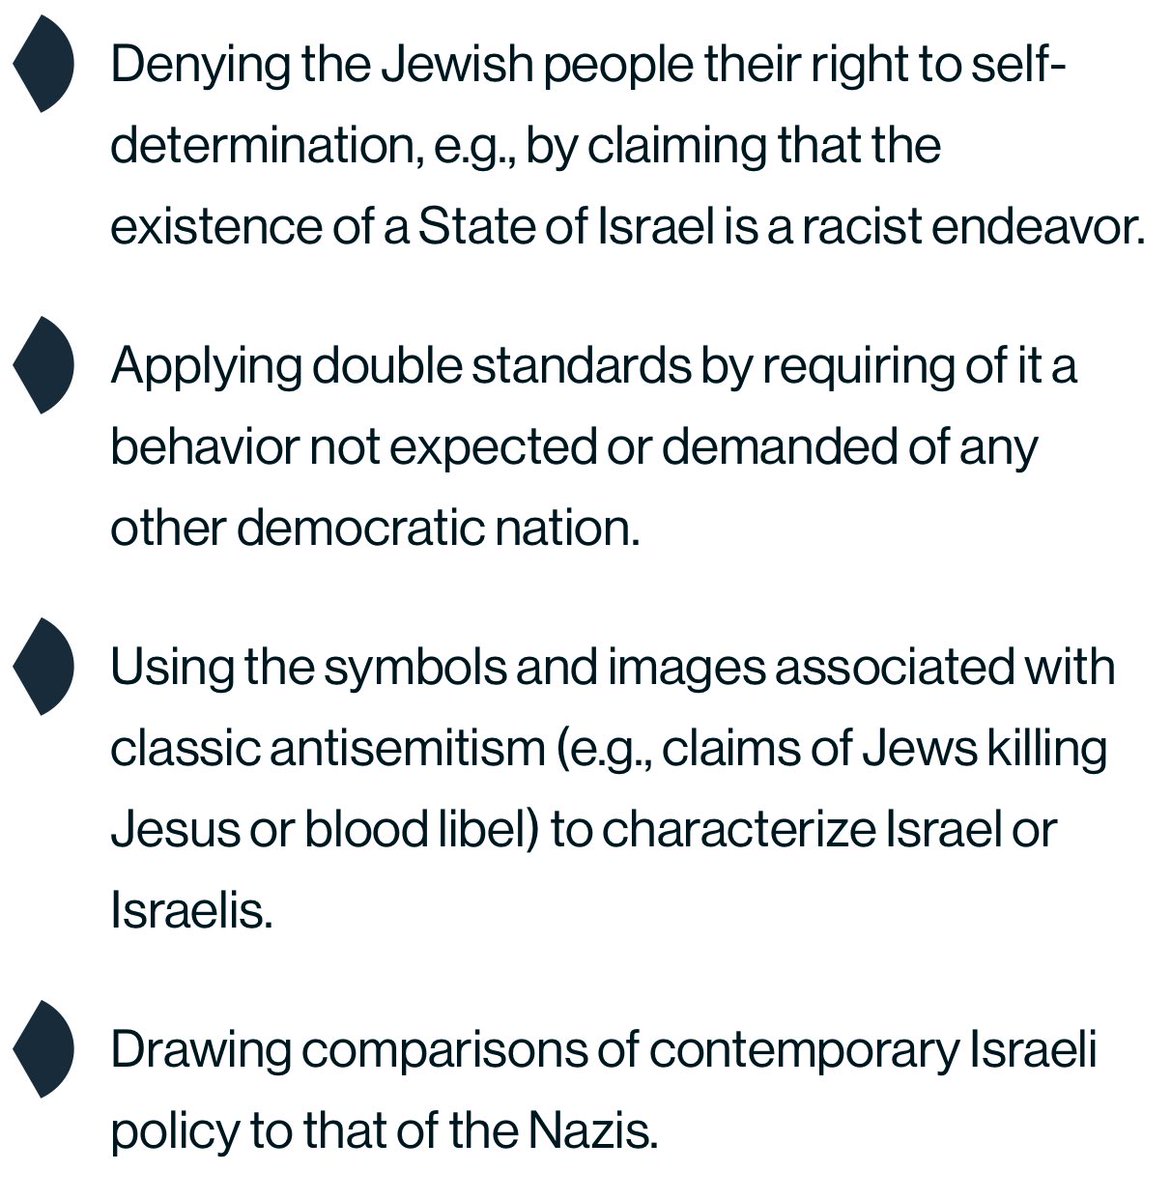 The vast majority of Republicans just voted for a bill to criminalize criticisms of the Israeli government. If the bill passes you will be guilty of hate speech if you “apply double standards” to the government of Israel or accuse it of genocide. This is honestly one of the most